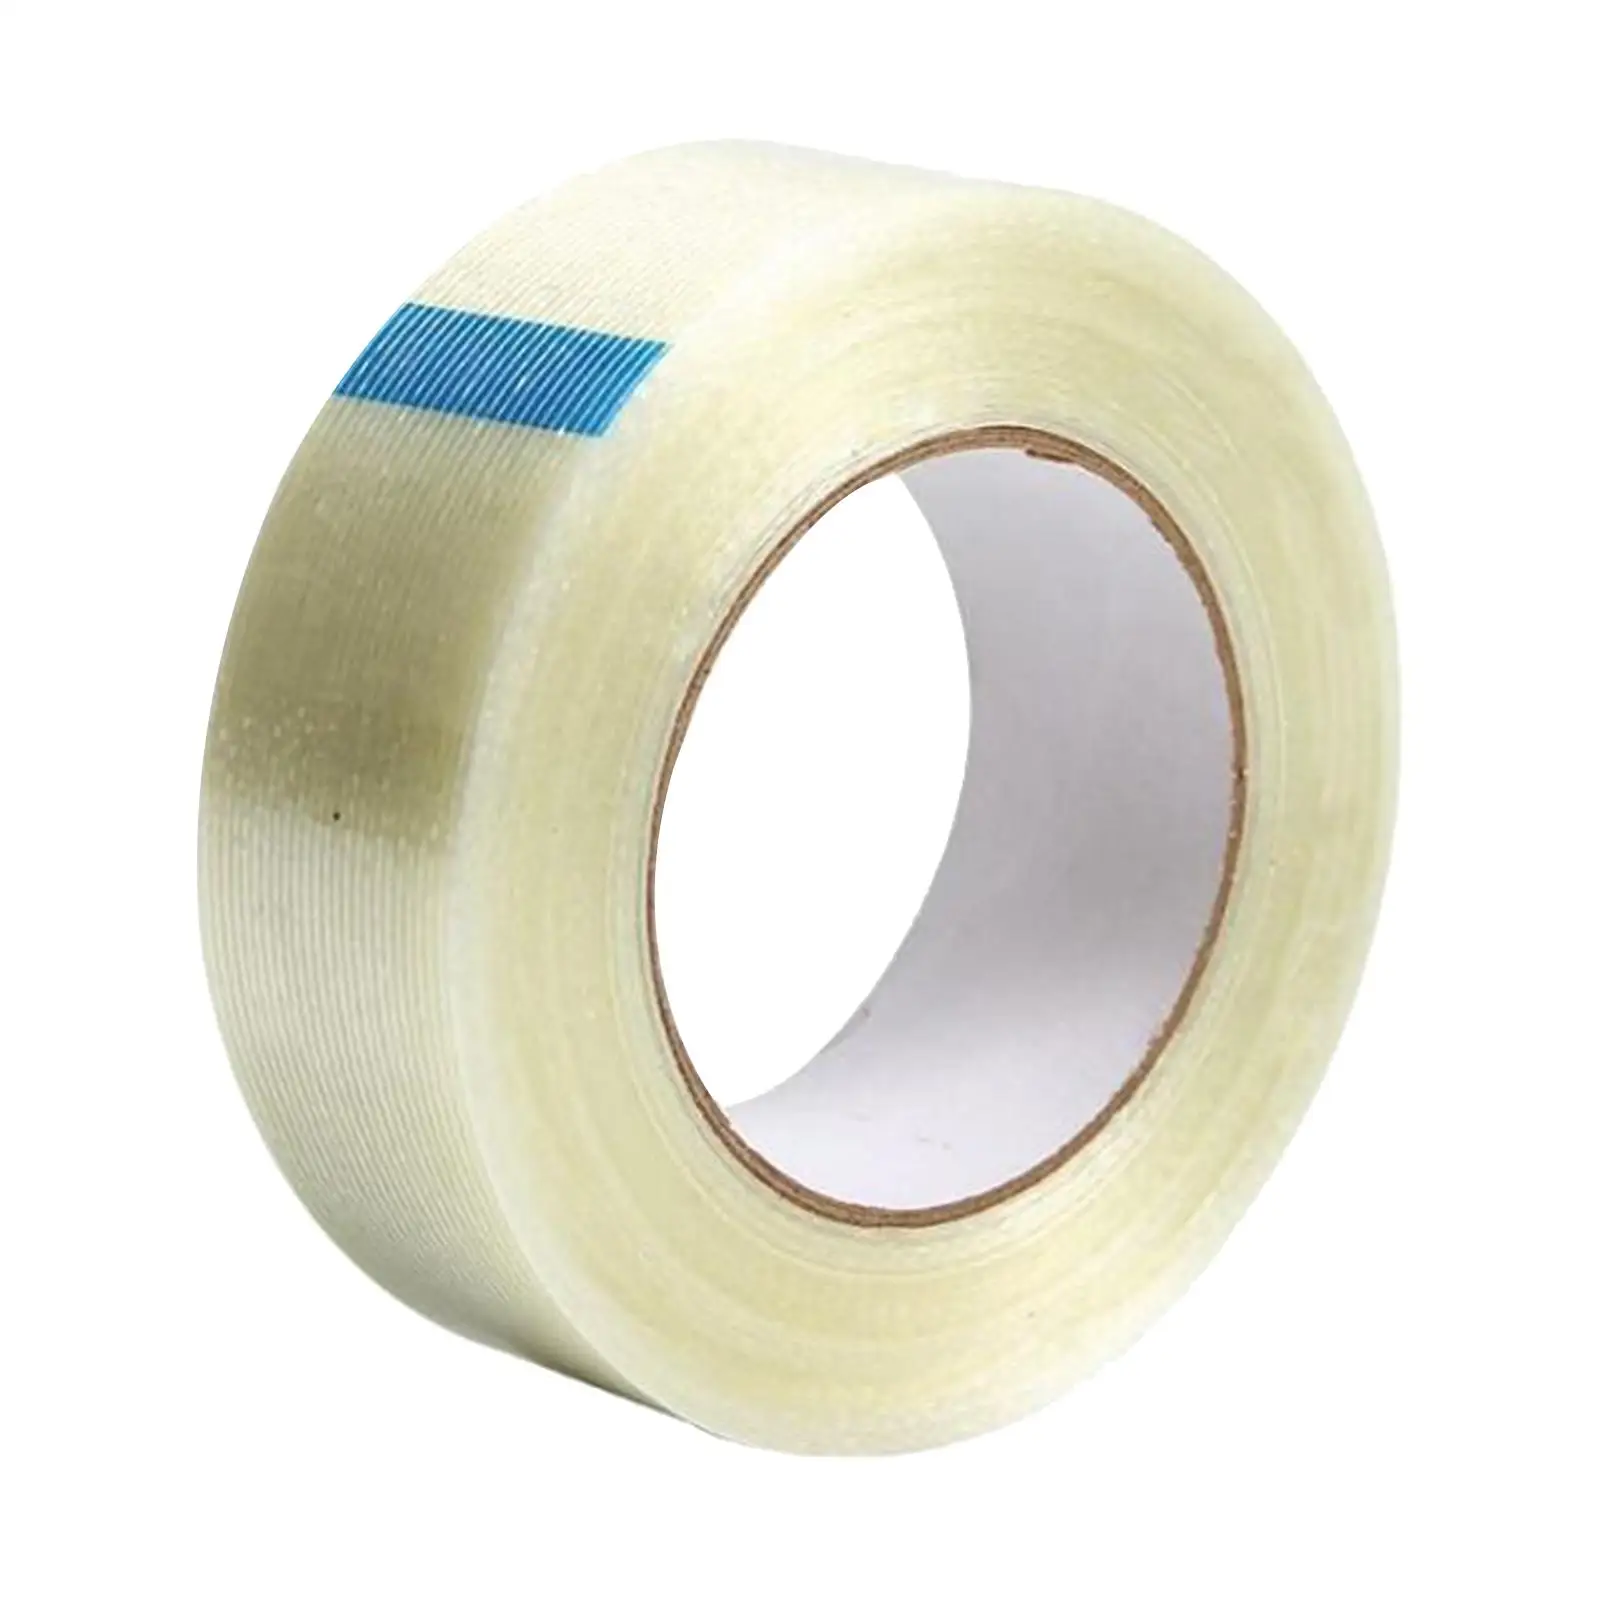 60Yards Wig Tape Roll Hair Toupee Tape Hairpiece Bonding Tape for Hair Replacement